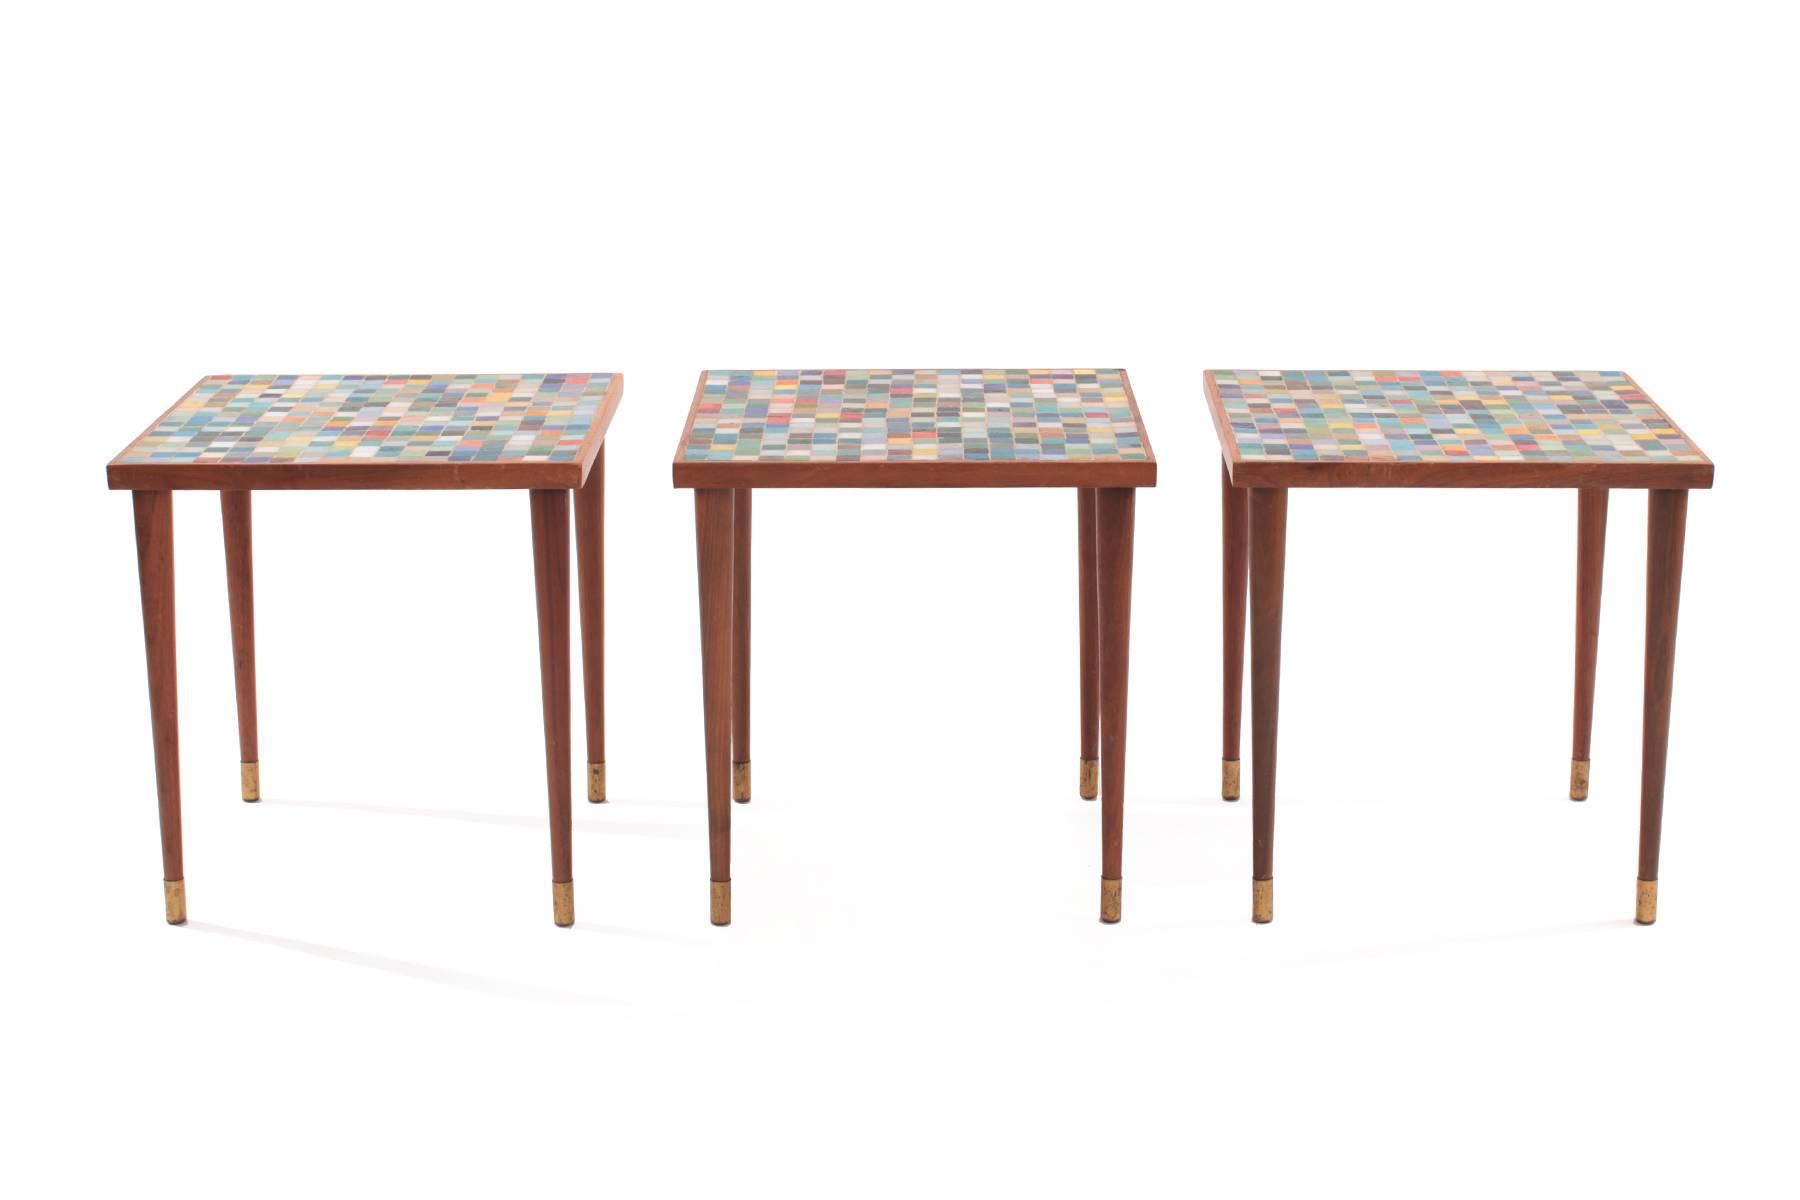 Three walnut brass and mosaic glass side tables circa late 1950s. These all original examples have tapered walnut legs with brass caps and lovely multi colored mosaic glass tops. Price listed is for the set of three.